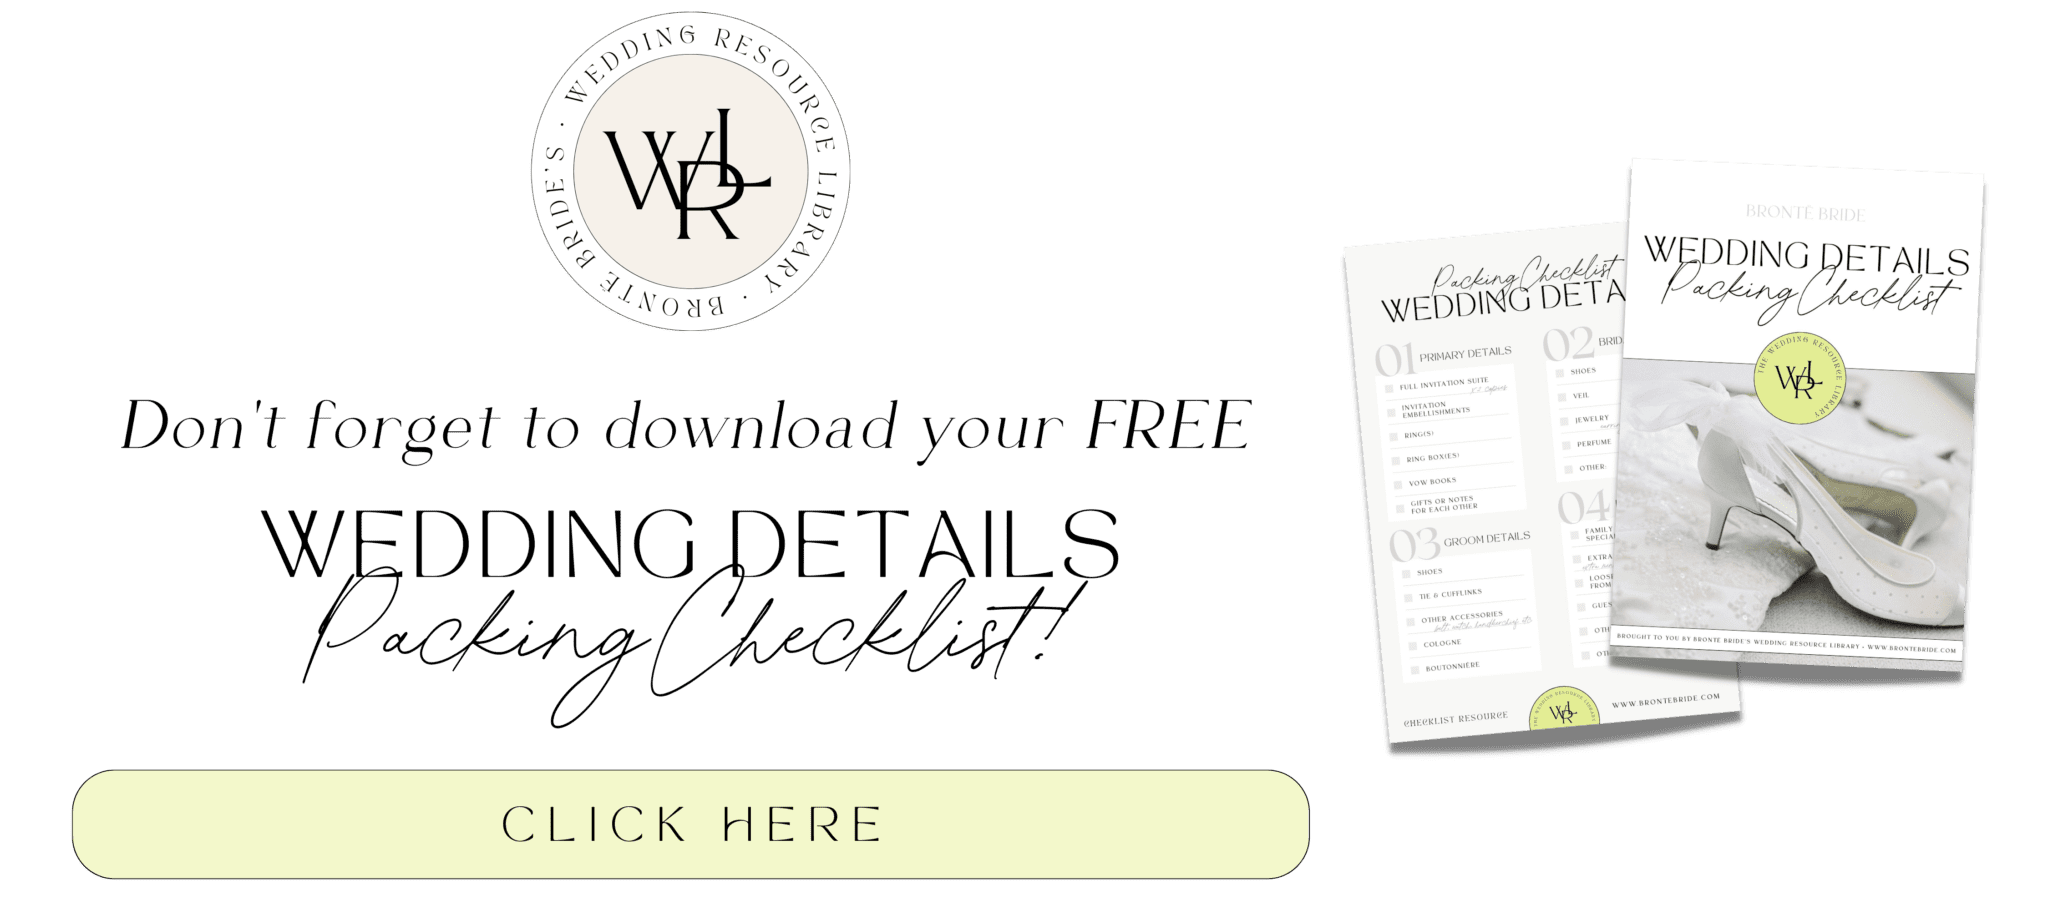 Brontë Bride's Wedding Resource Library - Wedding Details Packing Checklist // Sharing helpful wedding planning tools, checklists, and resources for engaged couples across Canada.